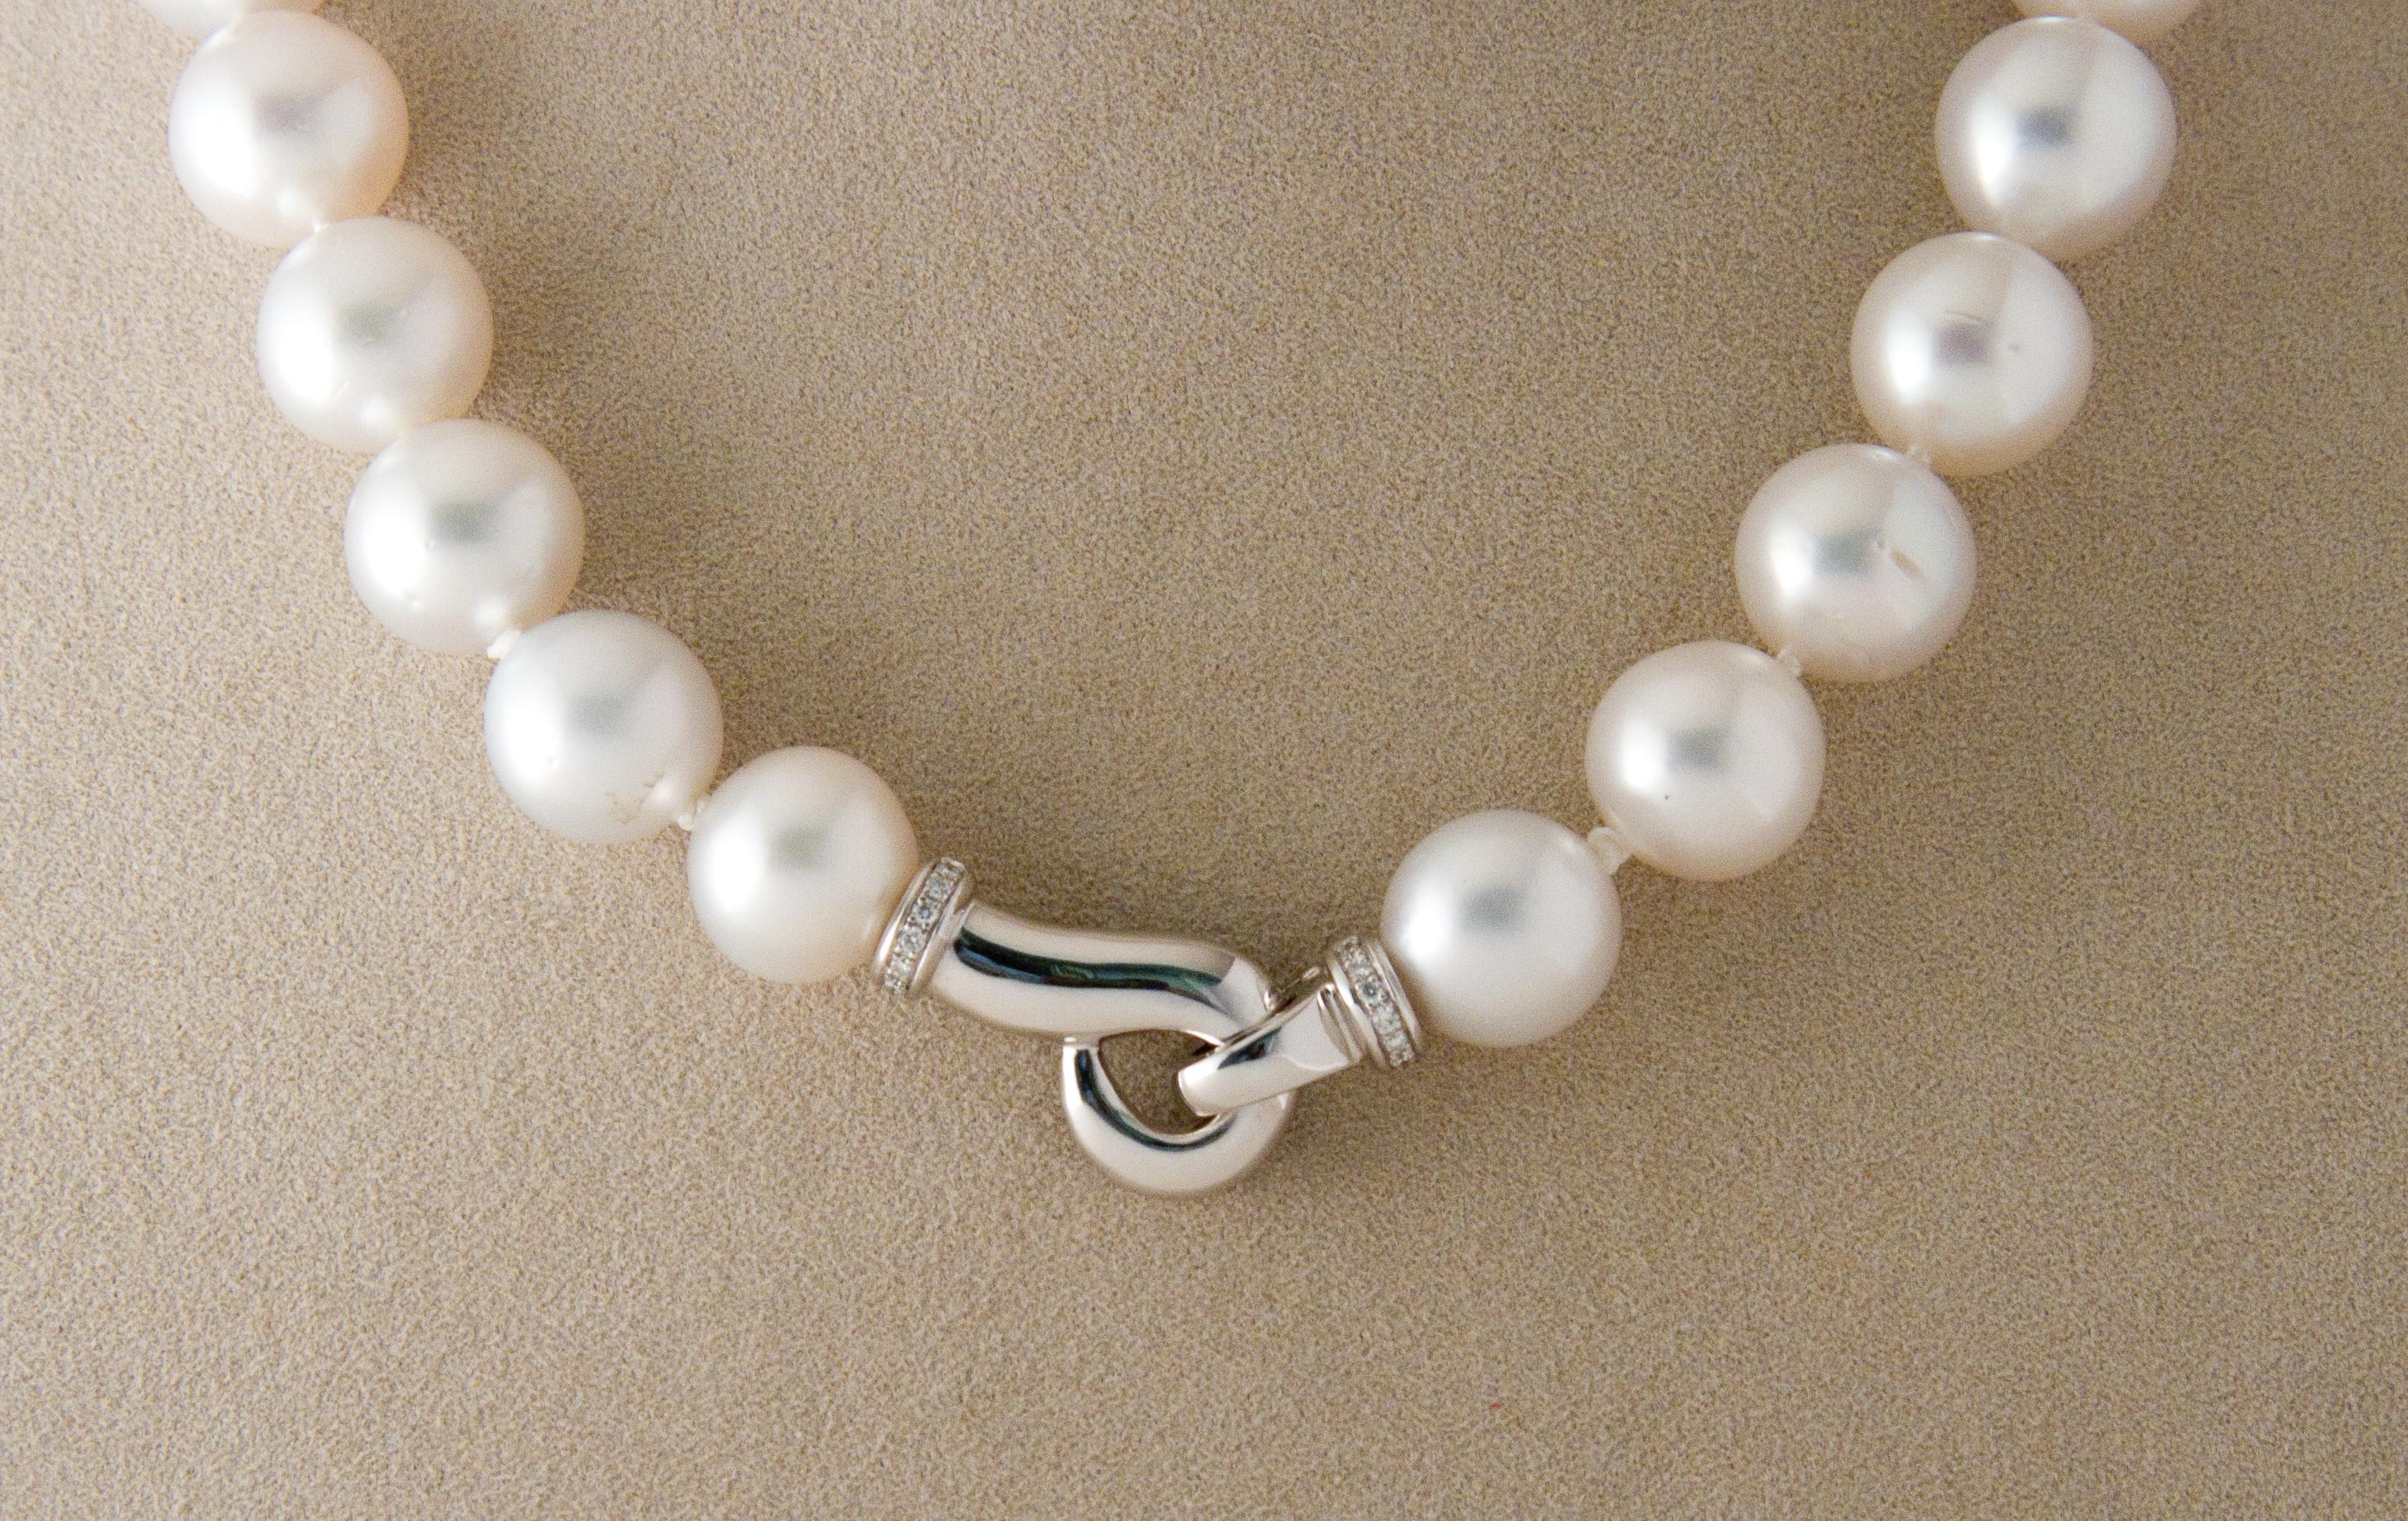 Women's South Sea Pearl Necklace with Claps Diamonds on White Gold 18 Karat